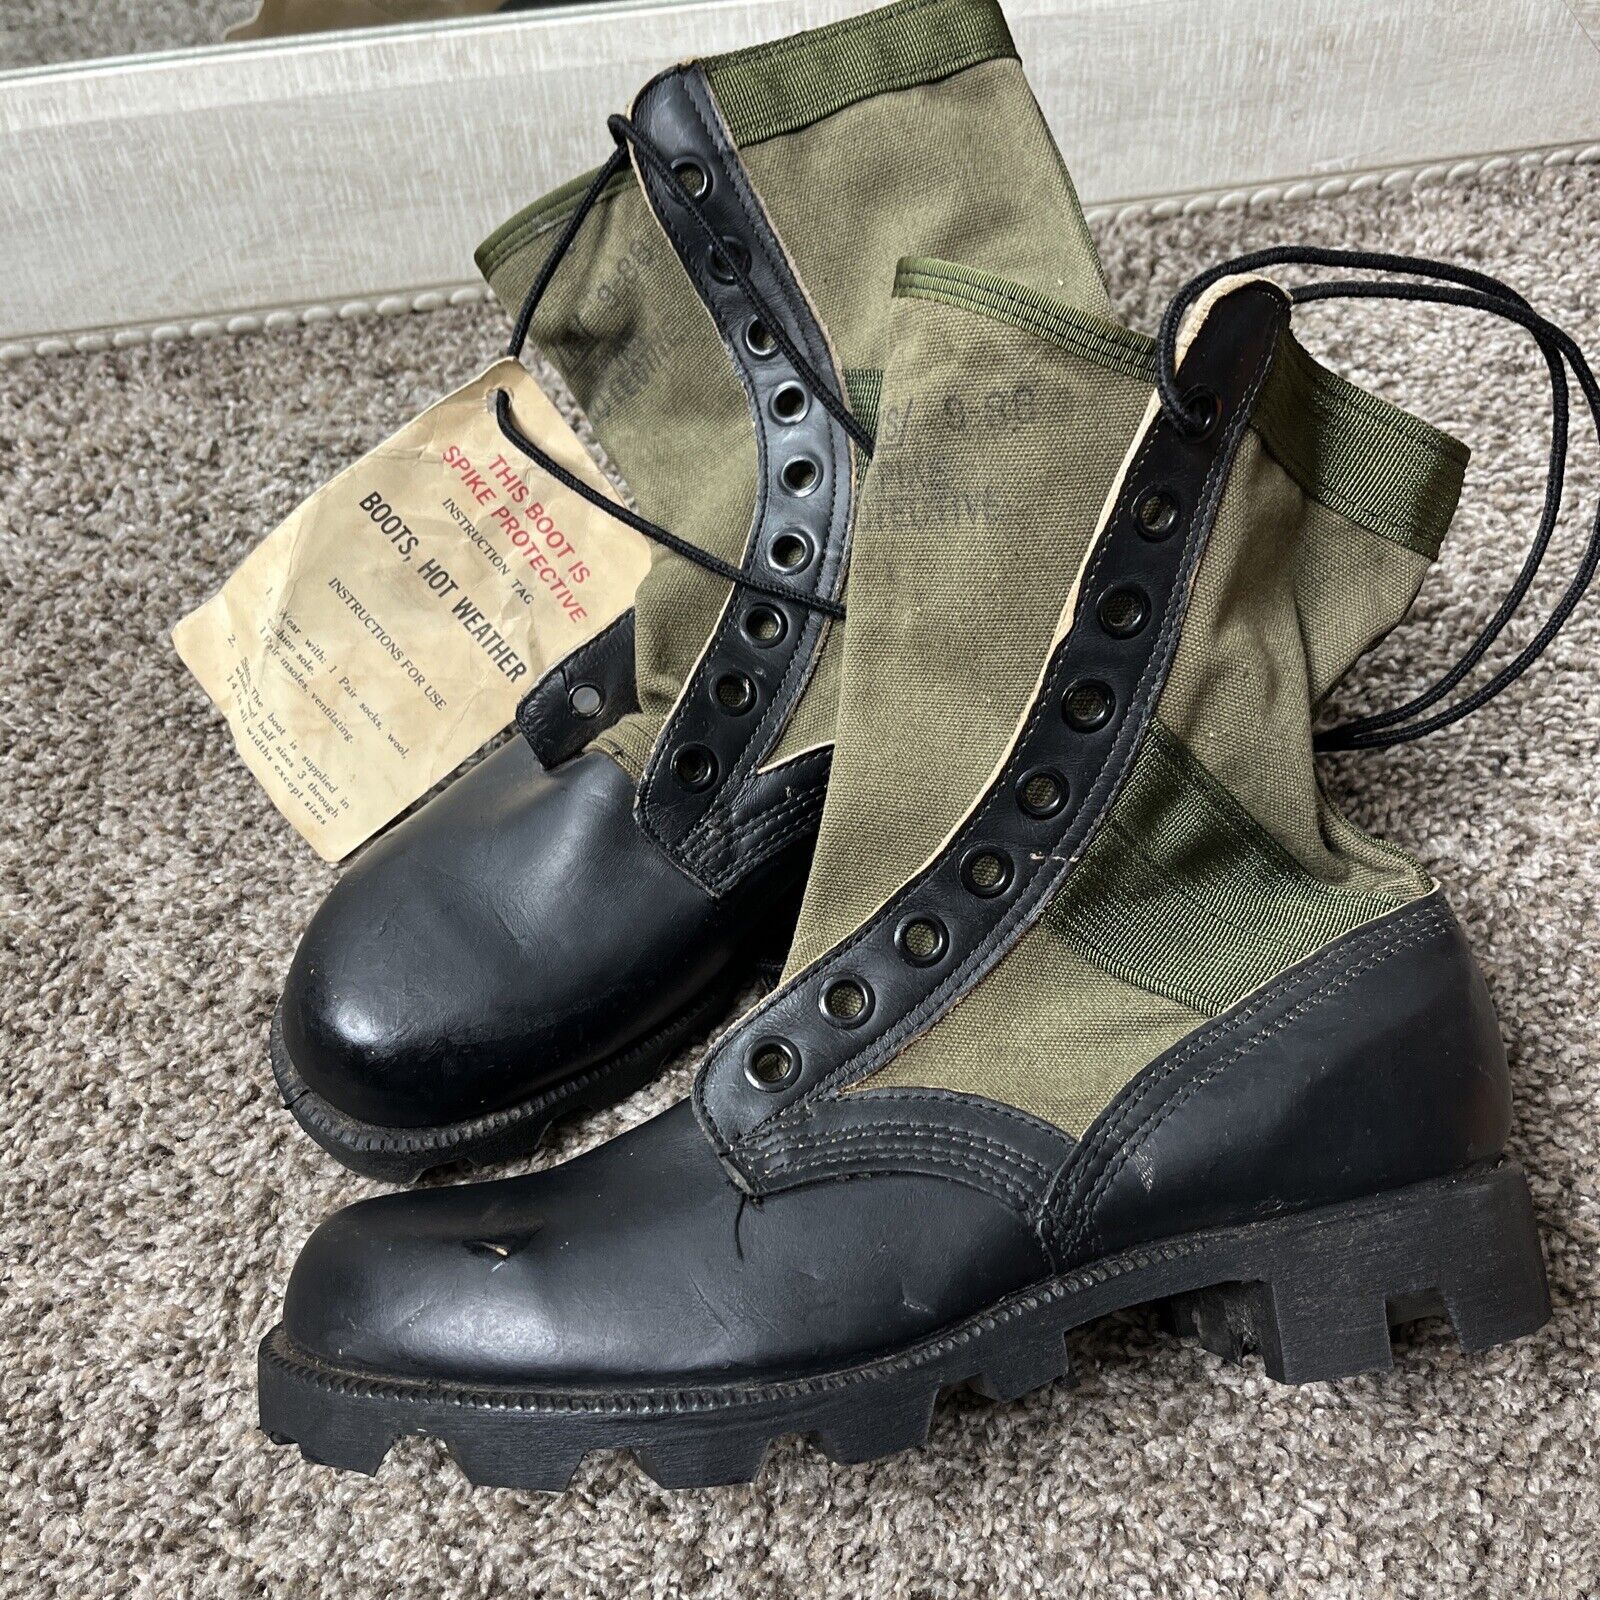 Vietnam Jungle Boots, 3rd Pattern with Panama Sole Sz 7.5 R 1988